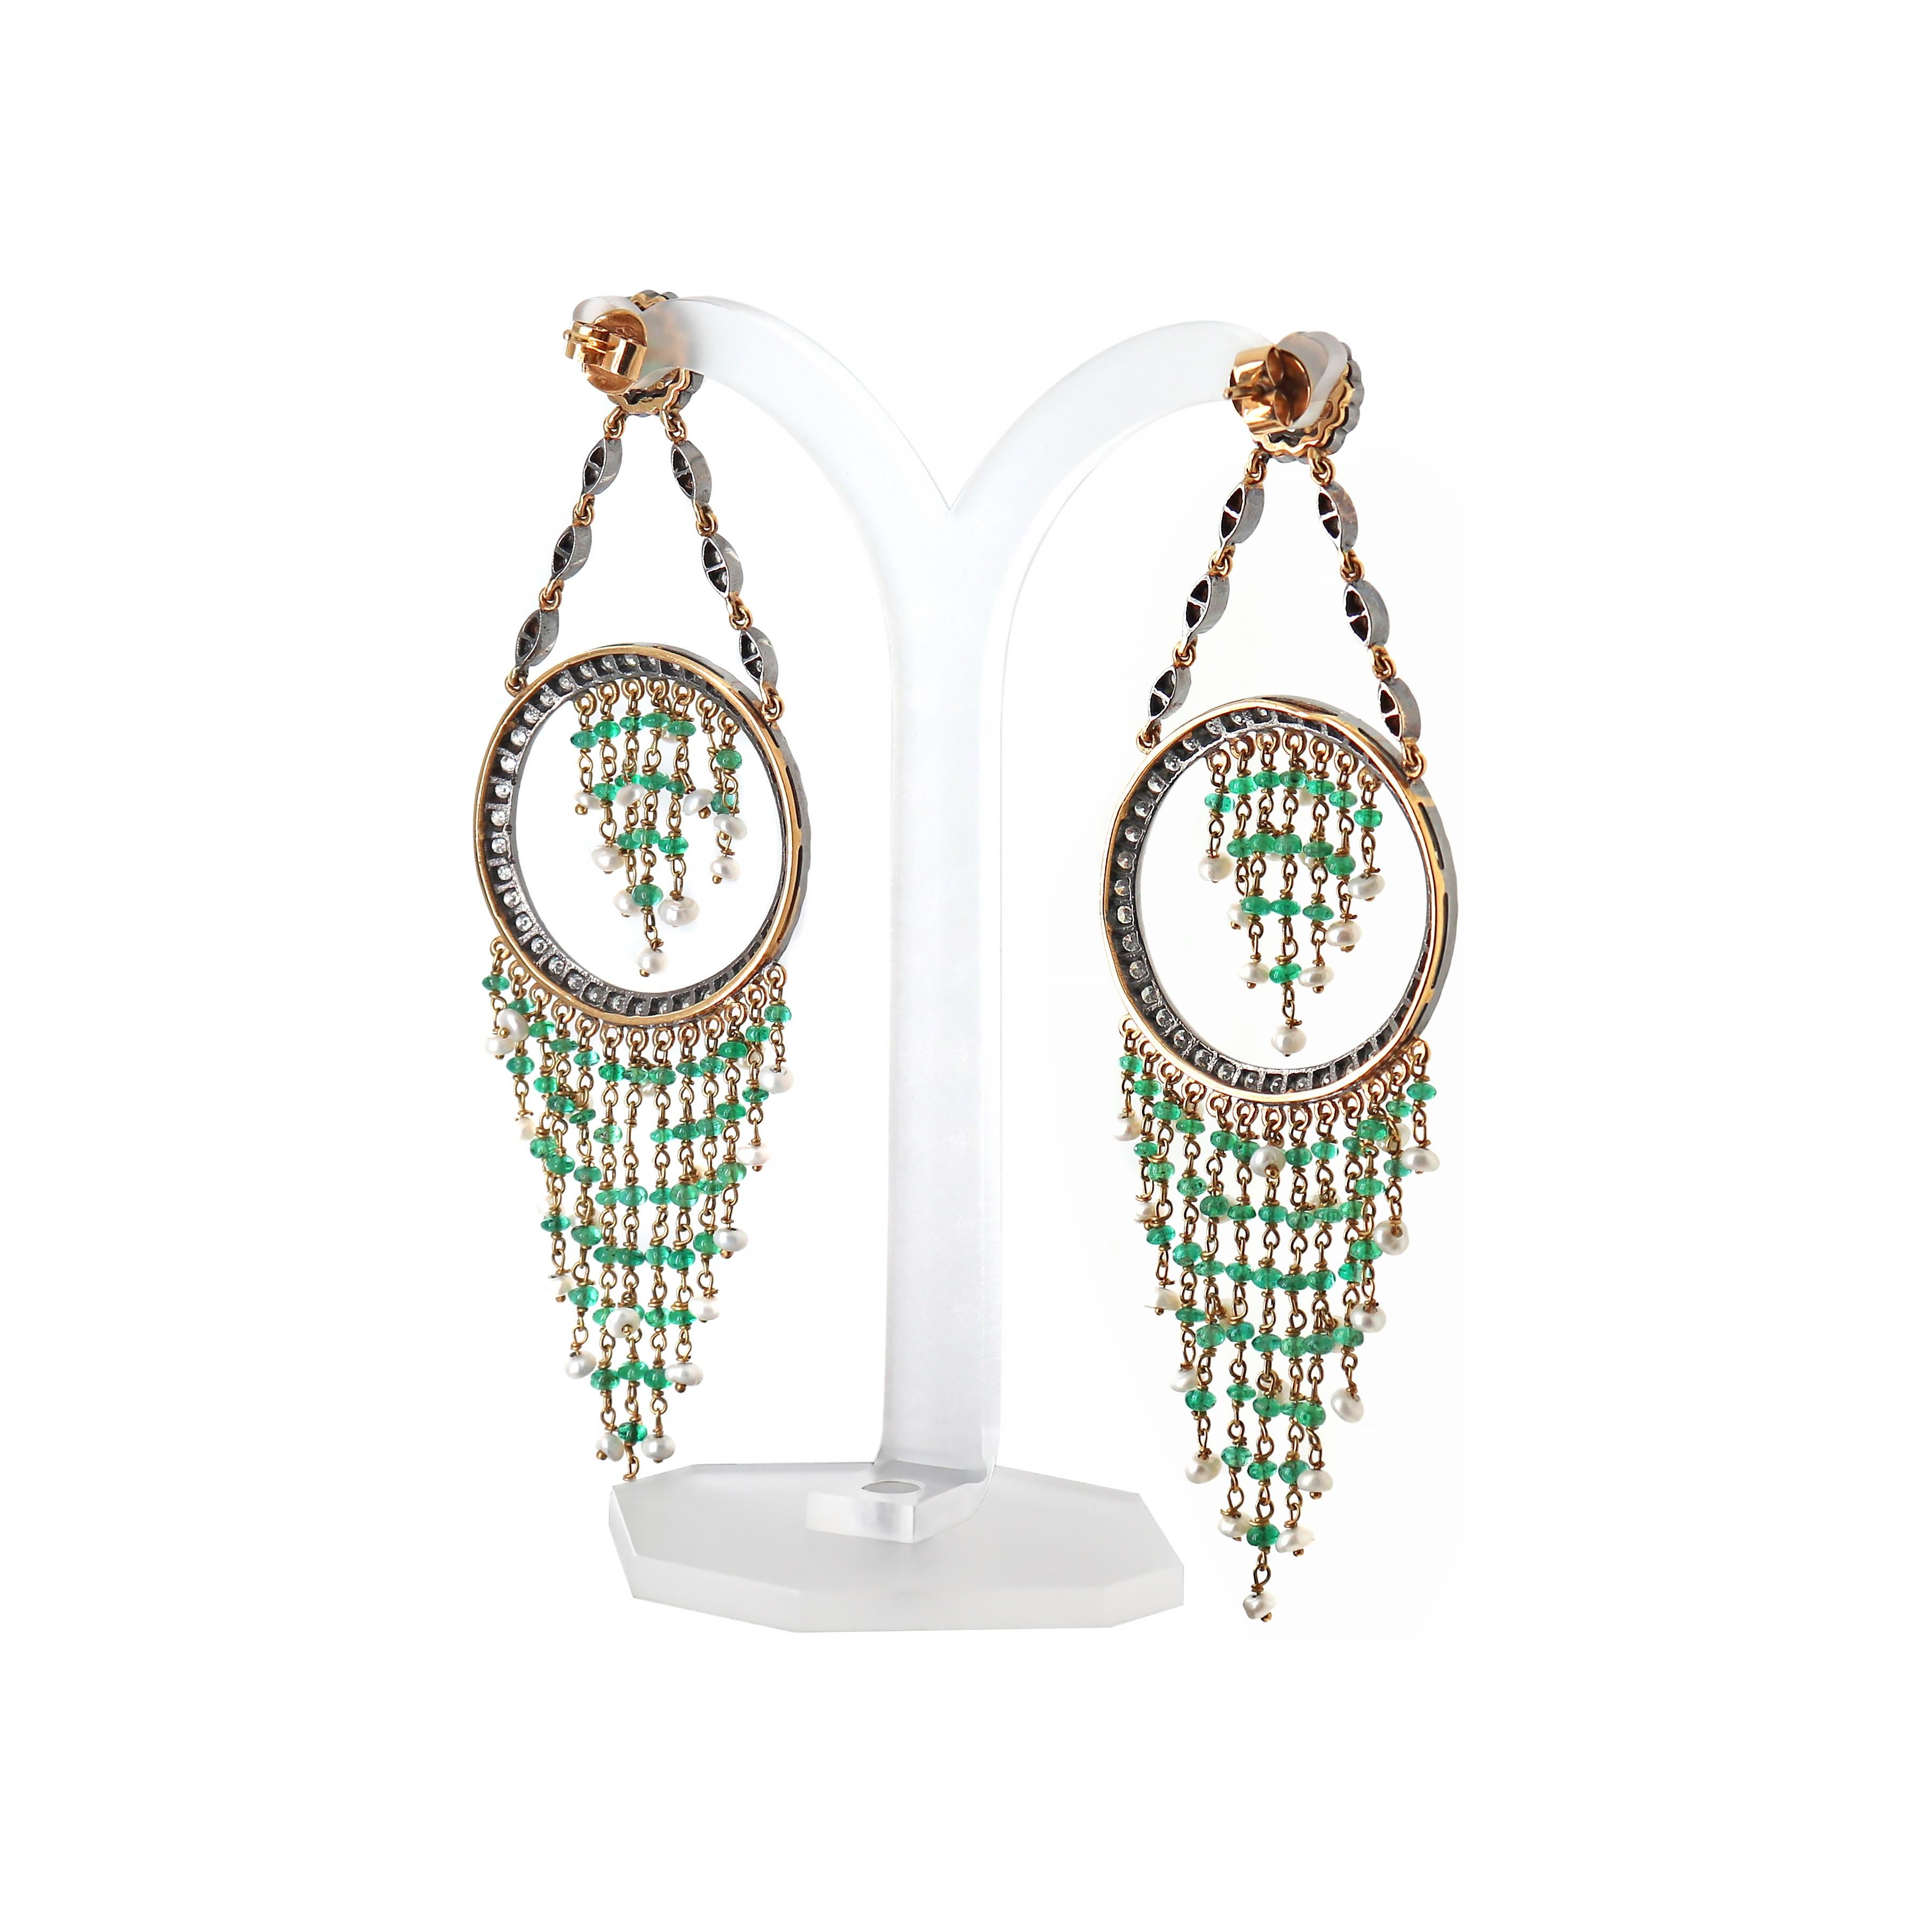 Beautiful hand made beaded chandelier earrings crafted from 18 karat yellow and white gold, featuring cascade tassel style emerald beads and baroque culture pearls. The edgings are hanging from a circle set with 40 round brilliant cut diamonds,